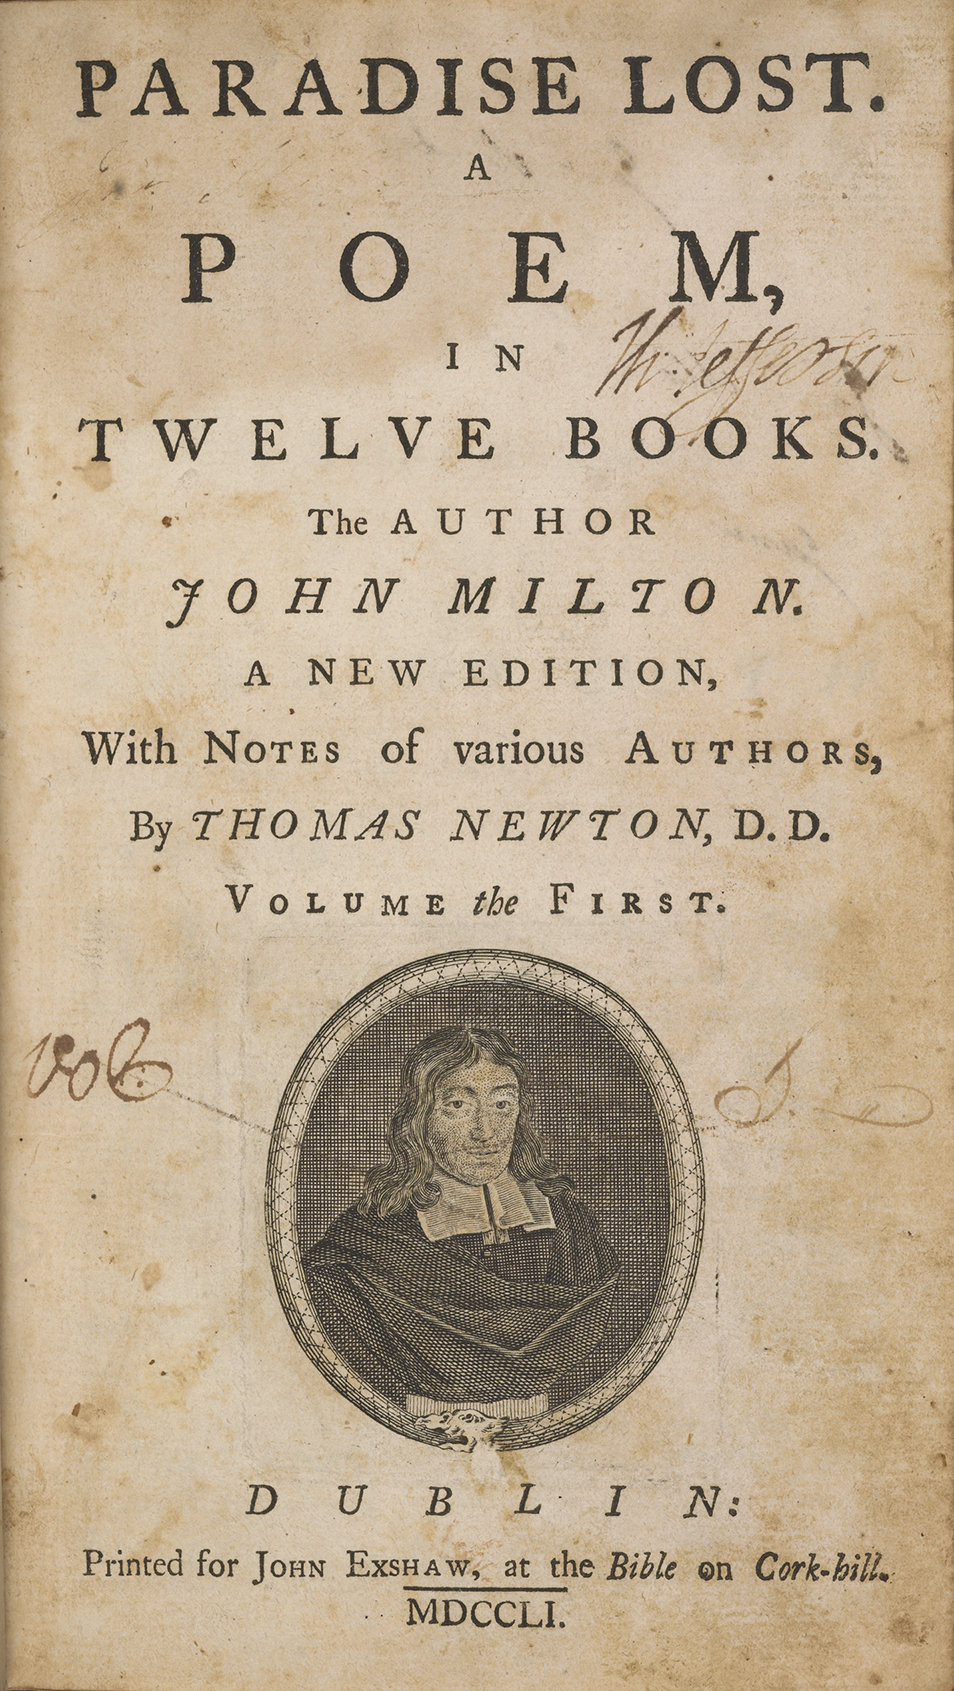 Milton and Early American Politics